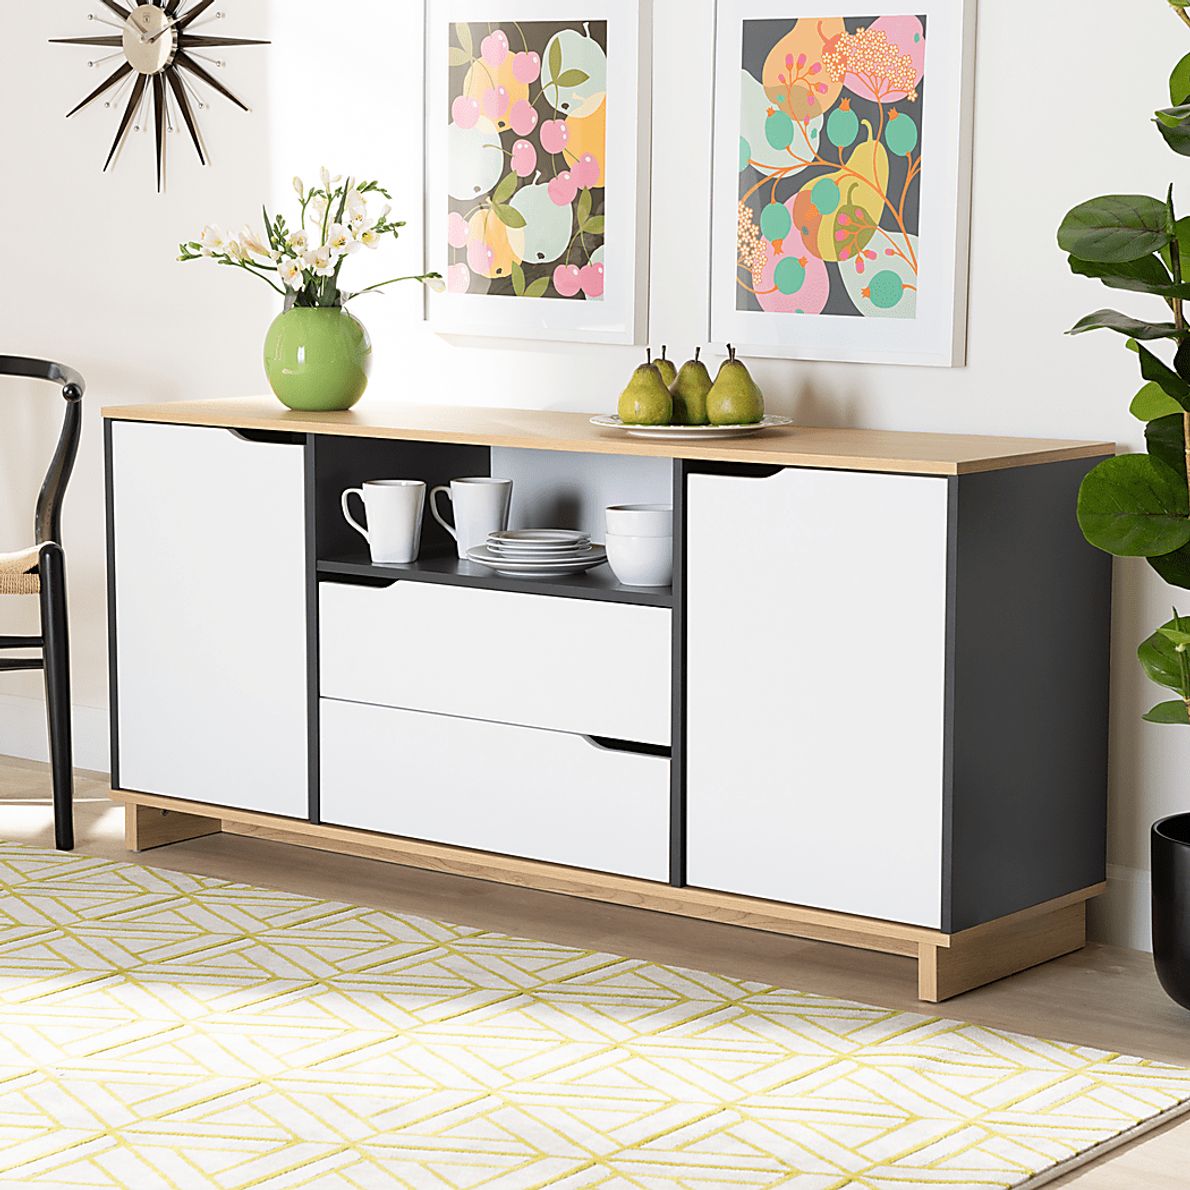 Annaley White Sideboard